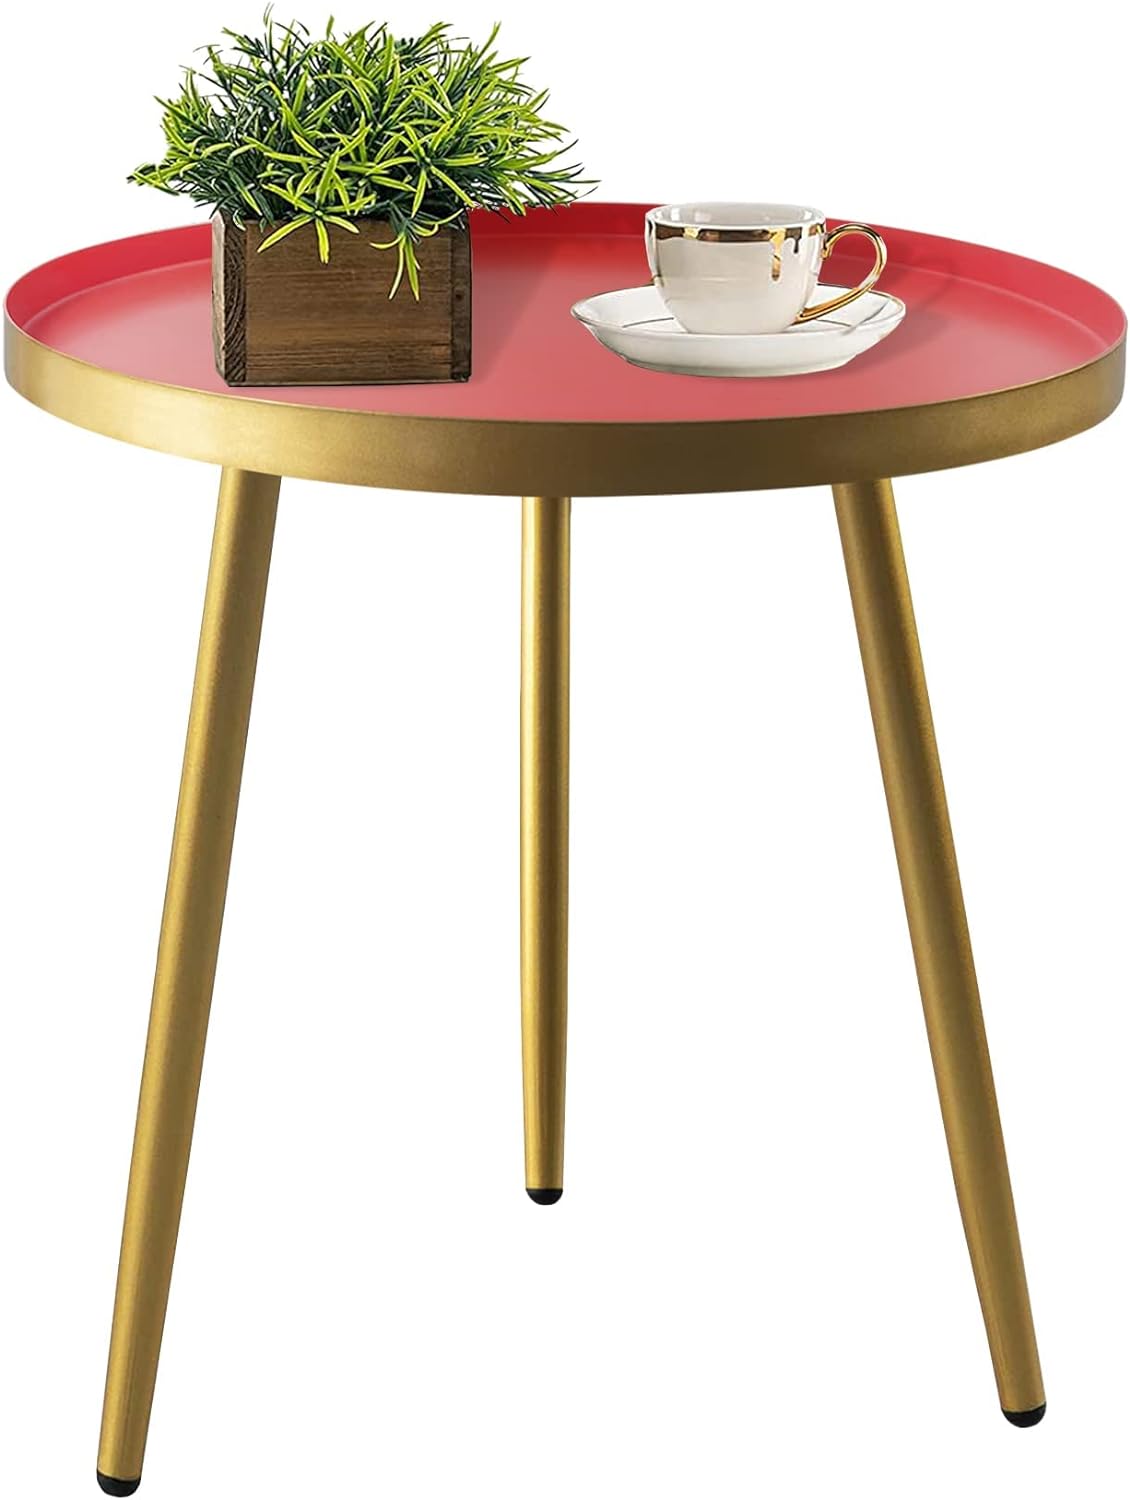 Round Side Table, End Table for Any Room-Side Tables Living Room, Side Tables Bedroom, Red Metal Tray End Table with Gold Legs Base, 15.8x18.9inches